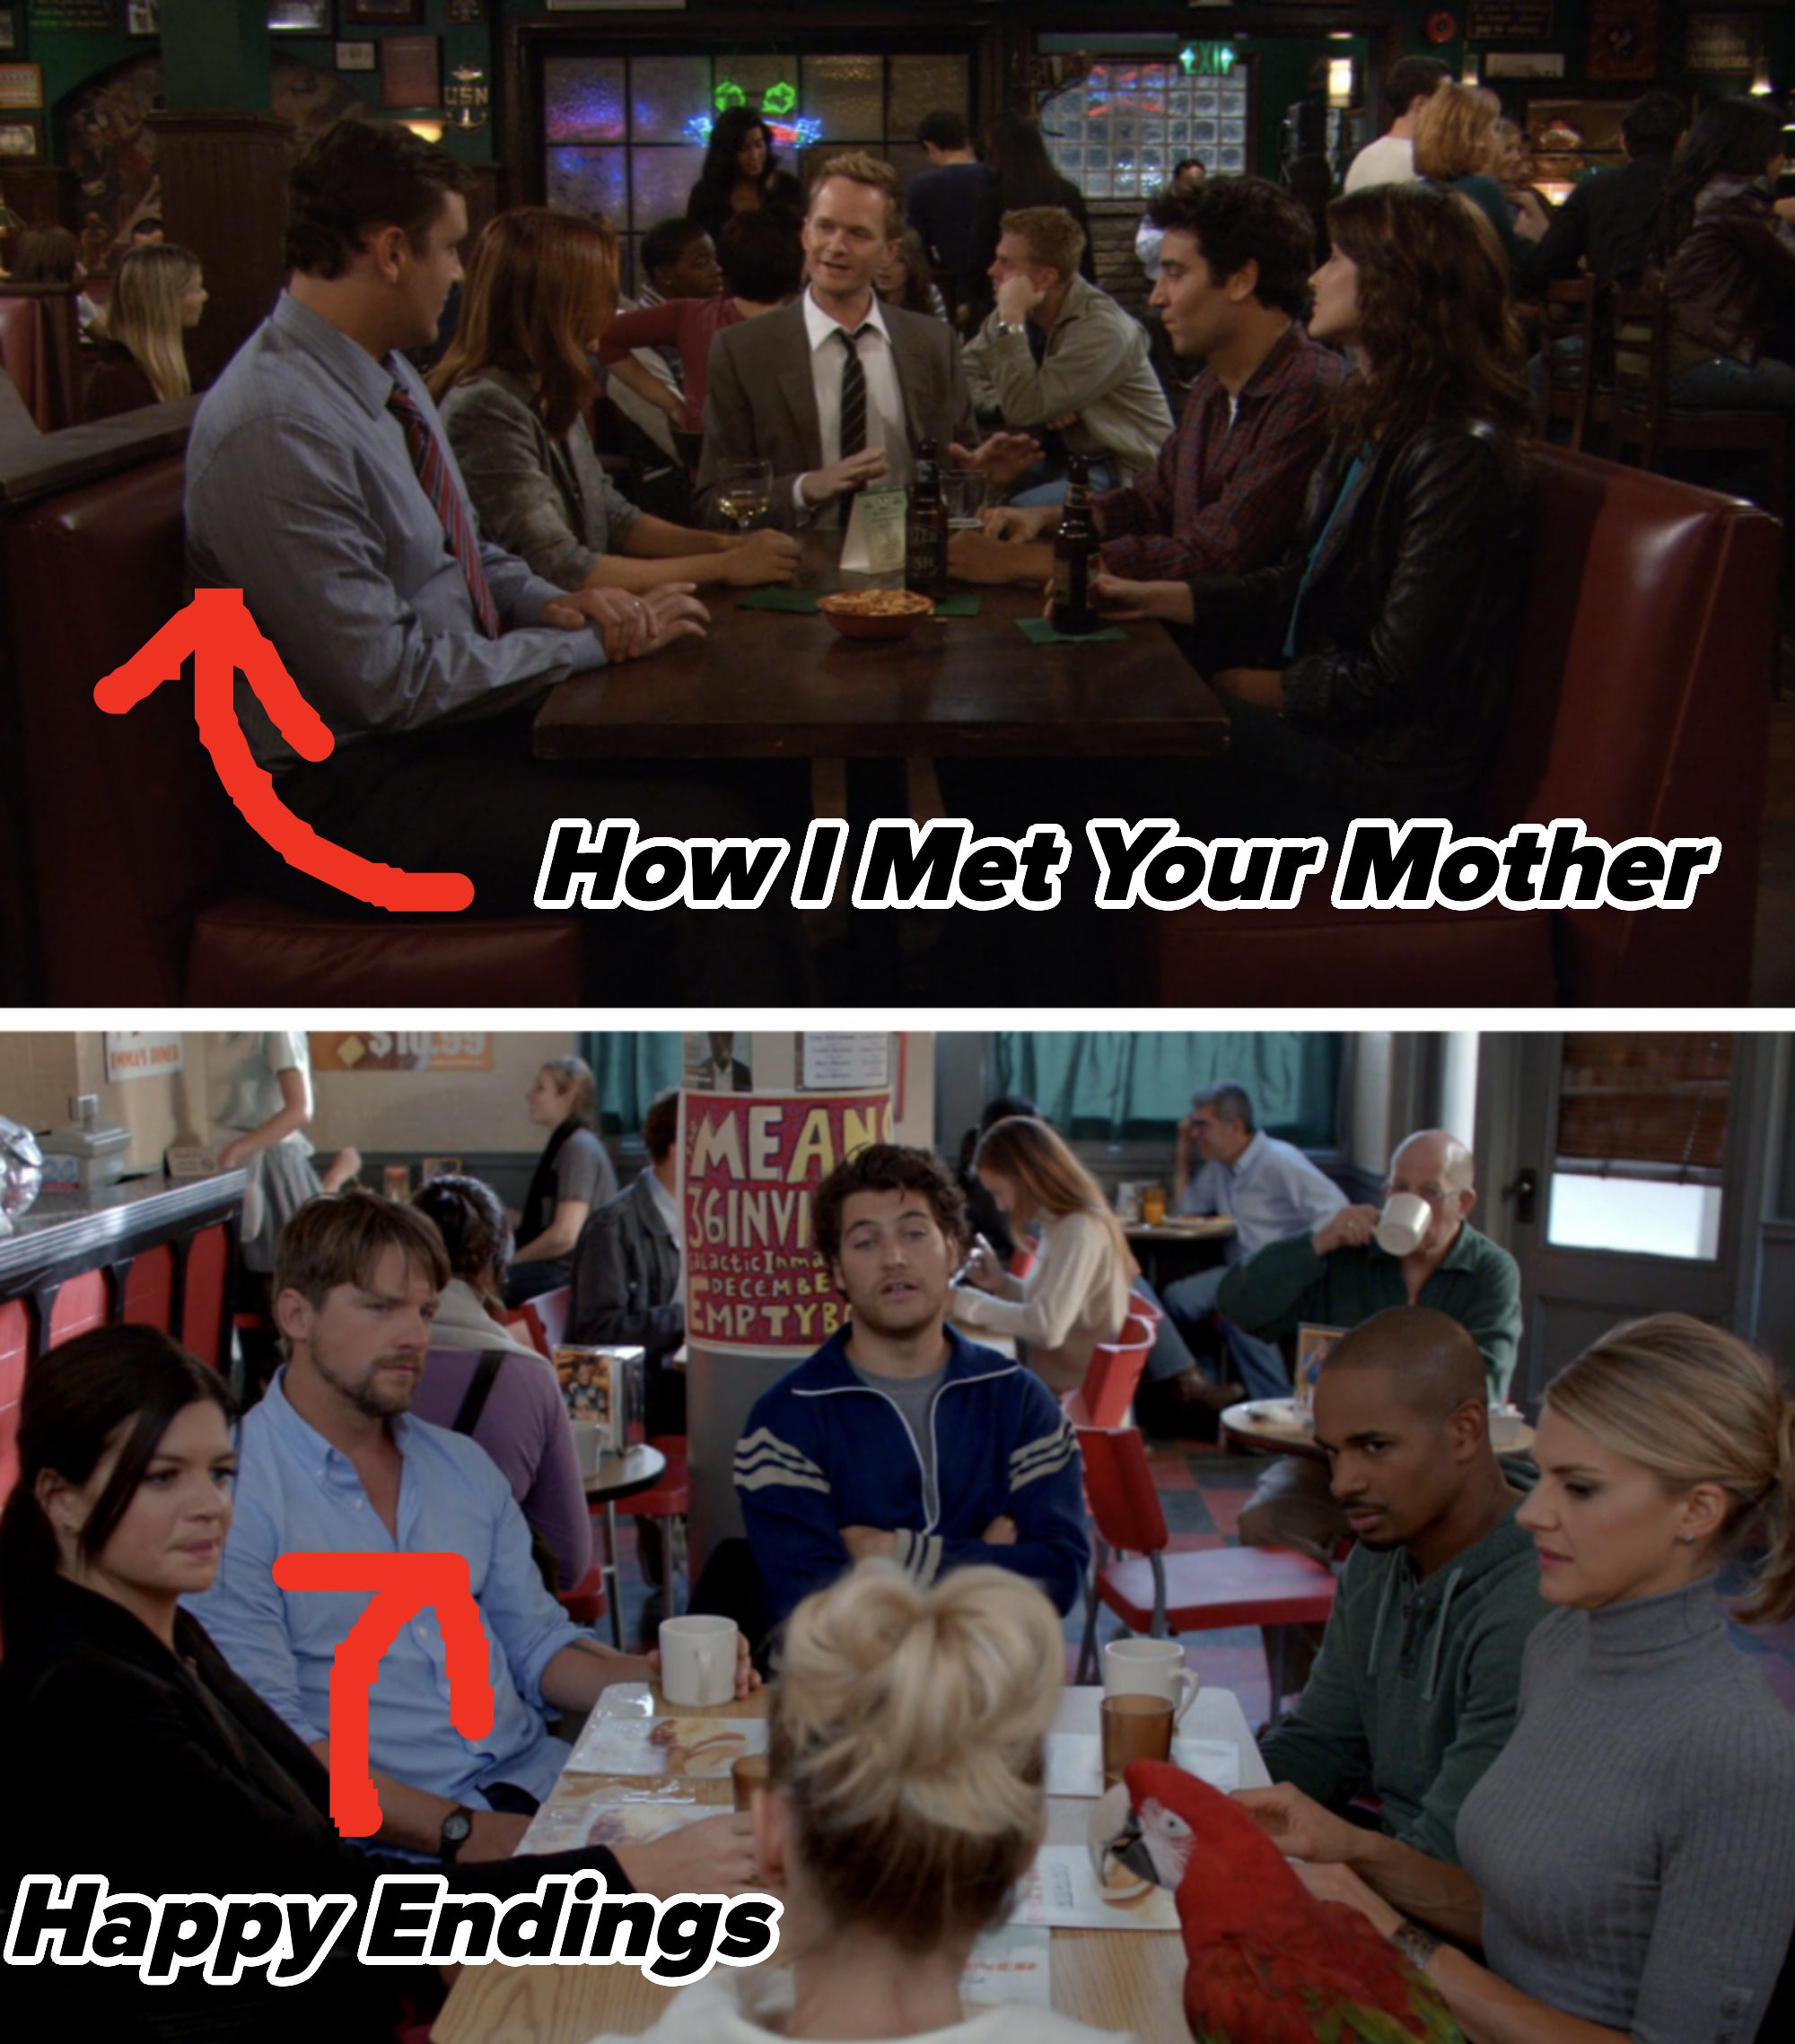 cast of how i met your mother and happy endings